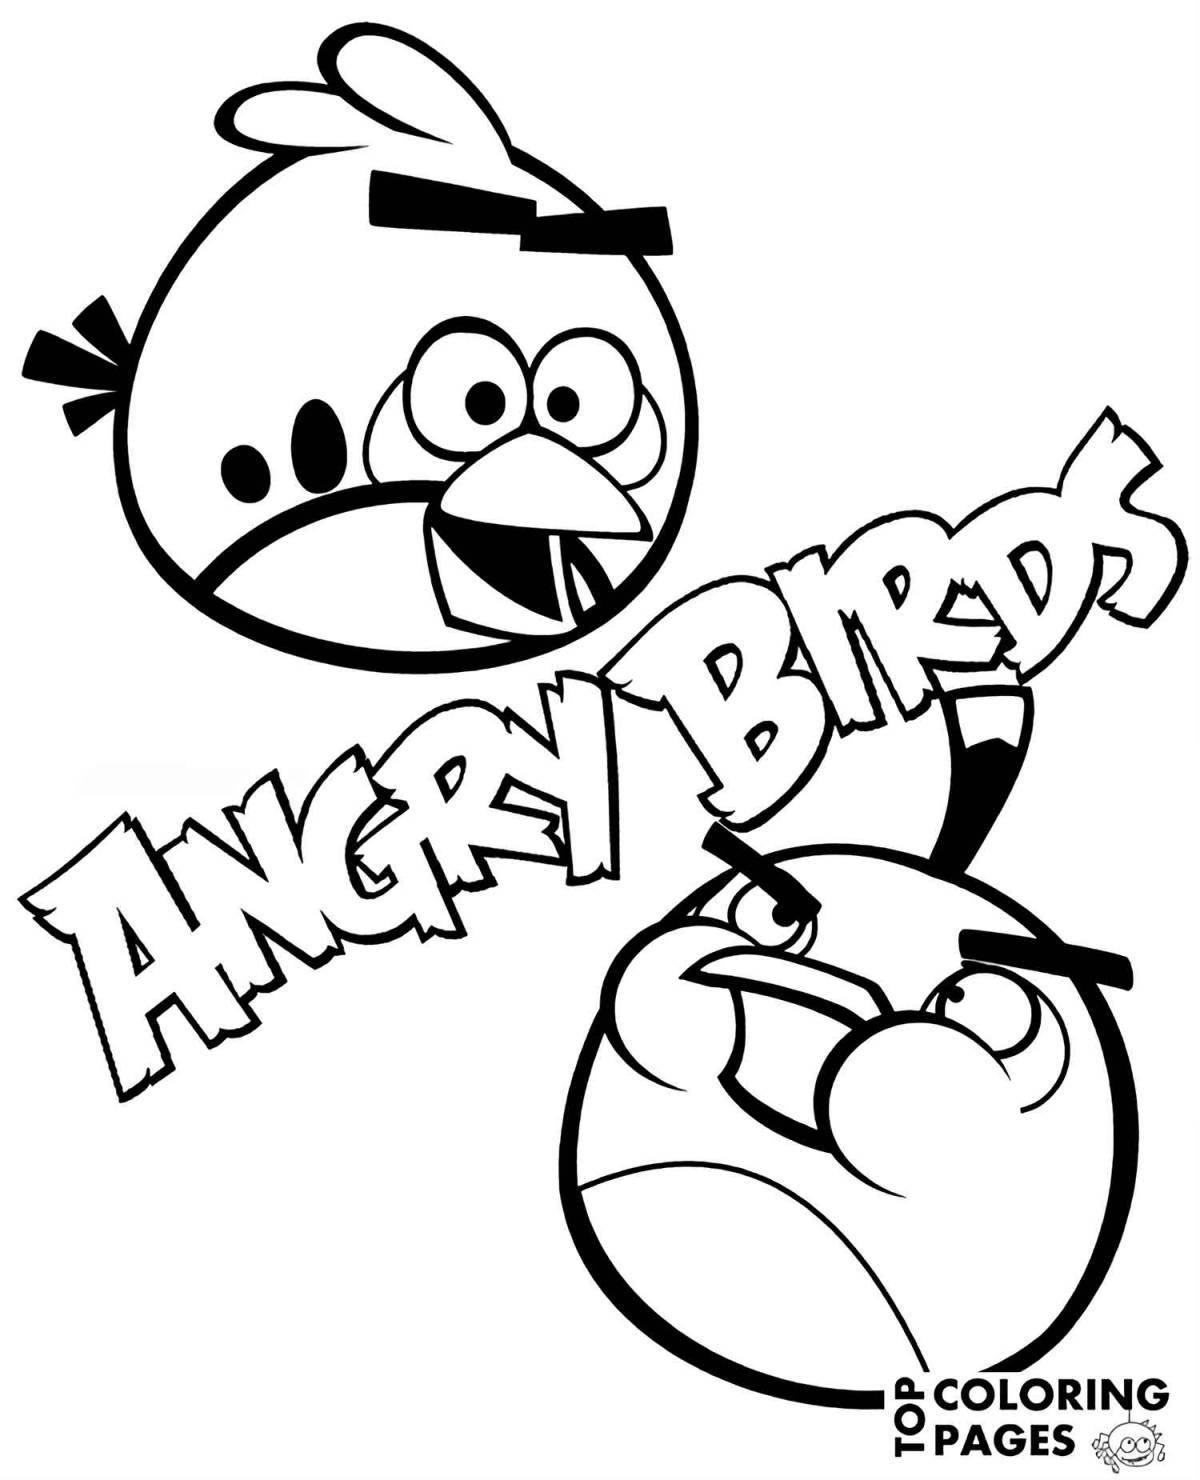 Attractive angry birds seasons coloring book